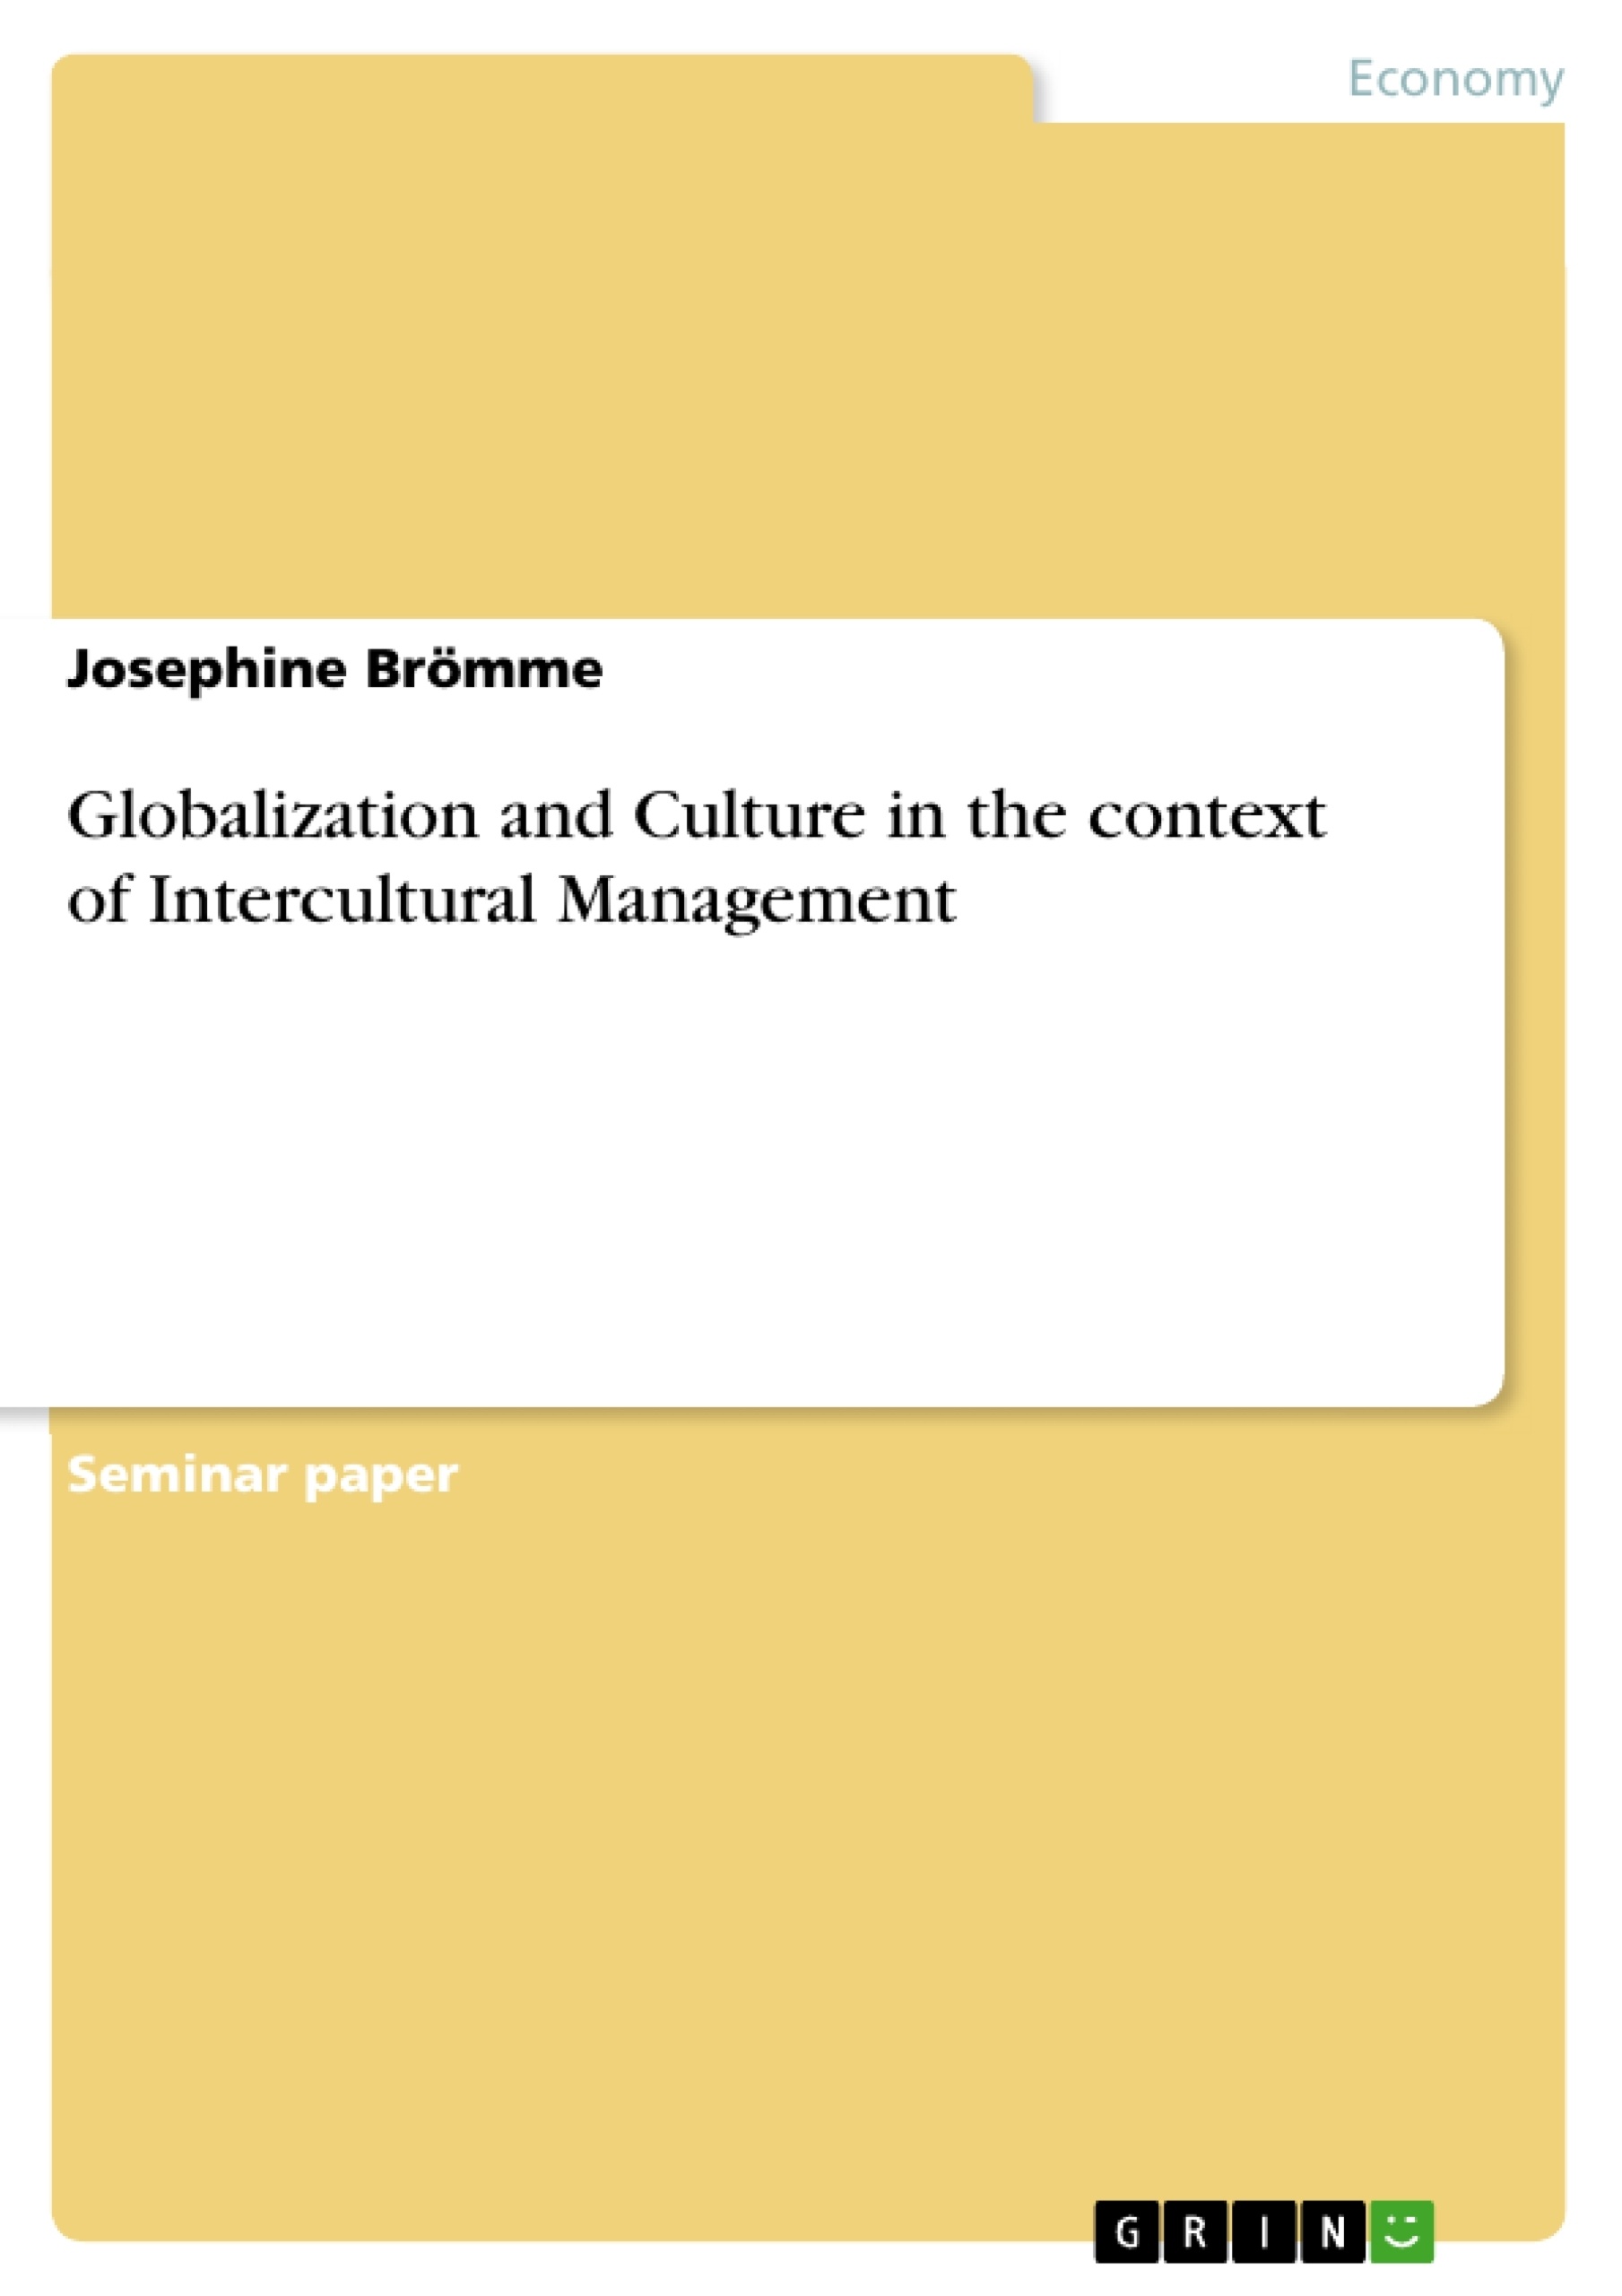 Title: Globalization and Culture in the context of Intercultural Management